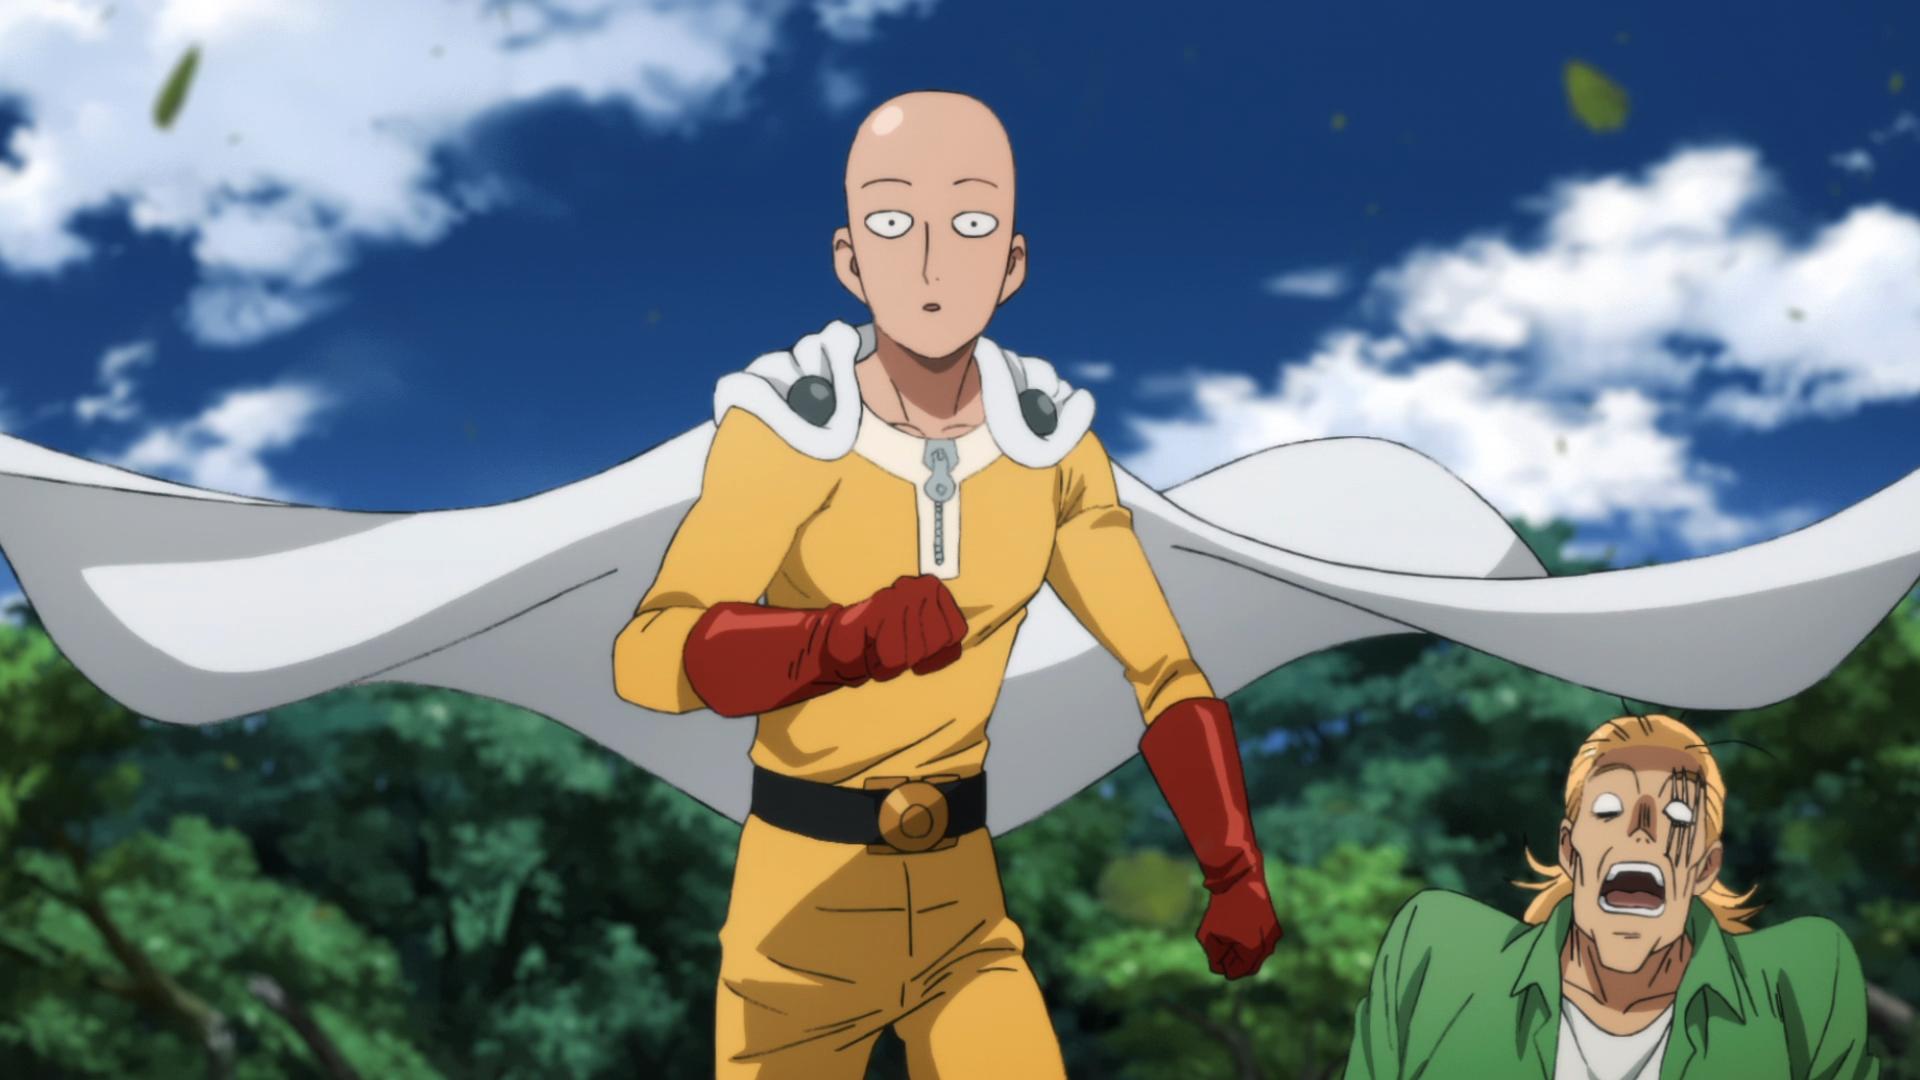 One Punch Man - JC STAFF VS MADHOUSE Animation Comparison Episode 5 